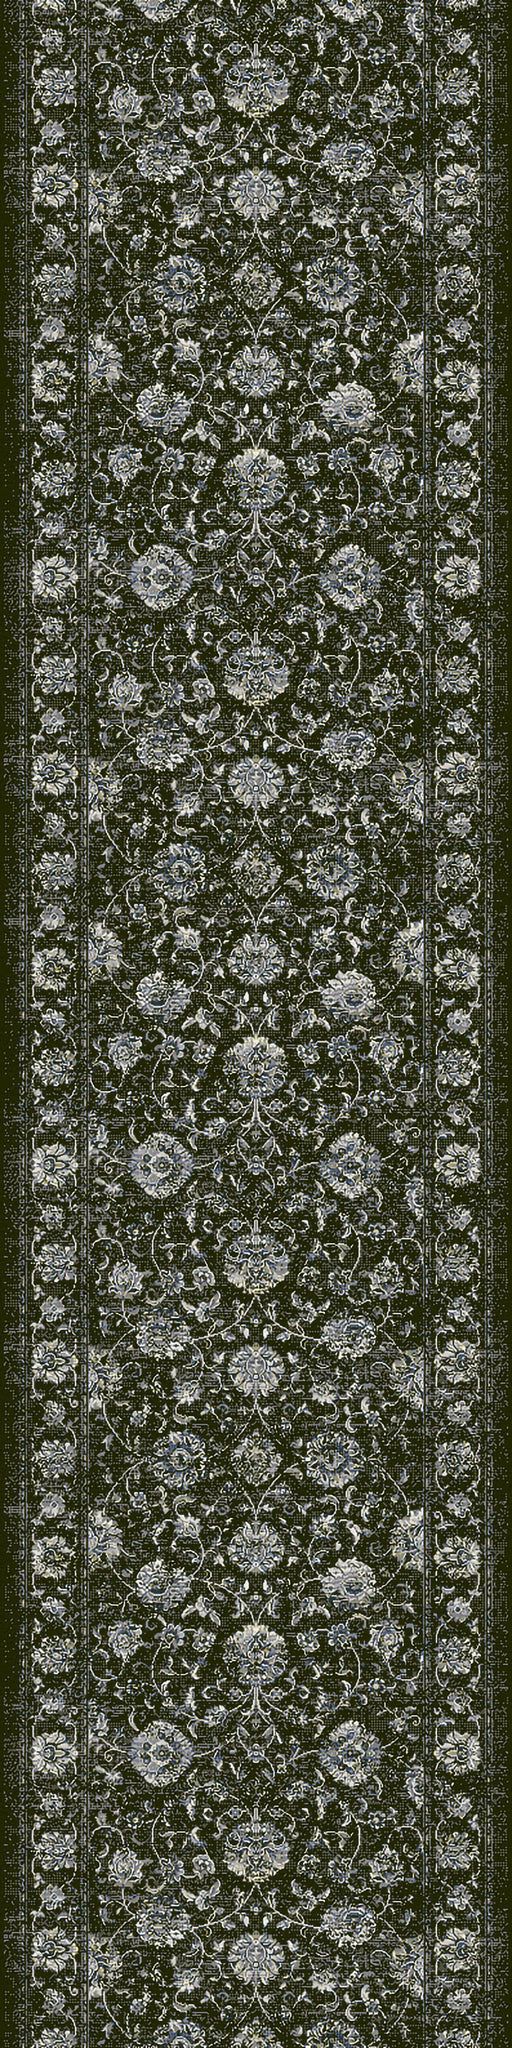 Dynamic Rugs Ancient Garden 57126 Charcoal/Silver